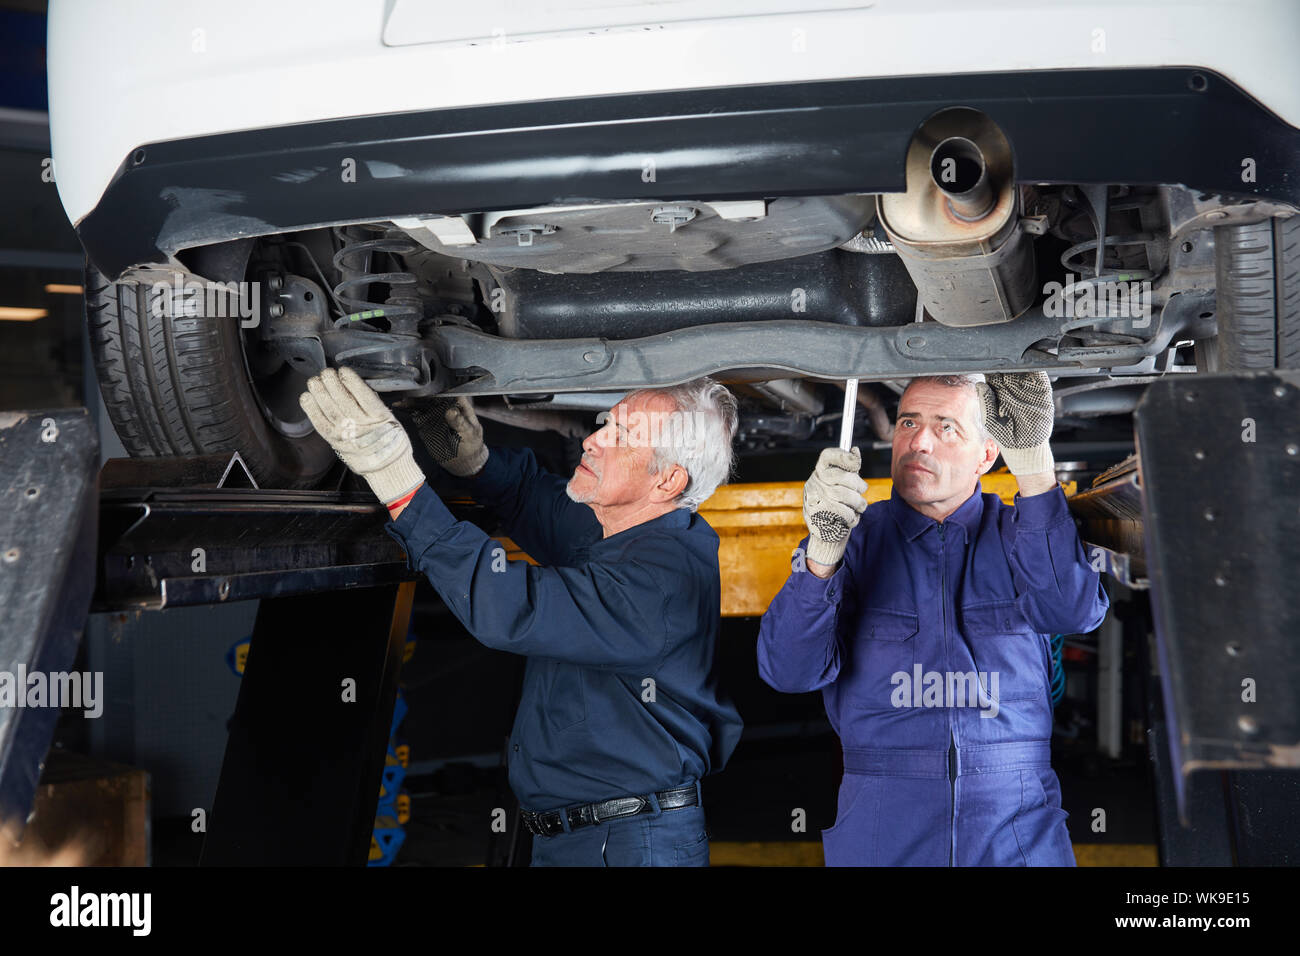 Two car mechanics or mechatronics inspect underbody protection on the car Stock Photo